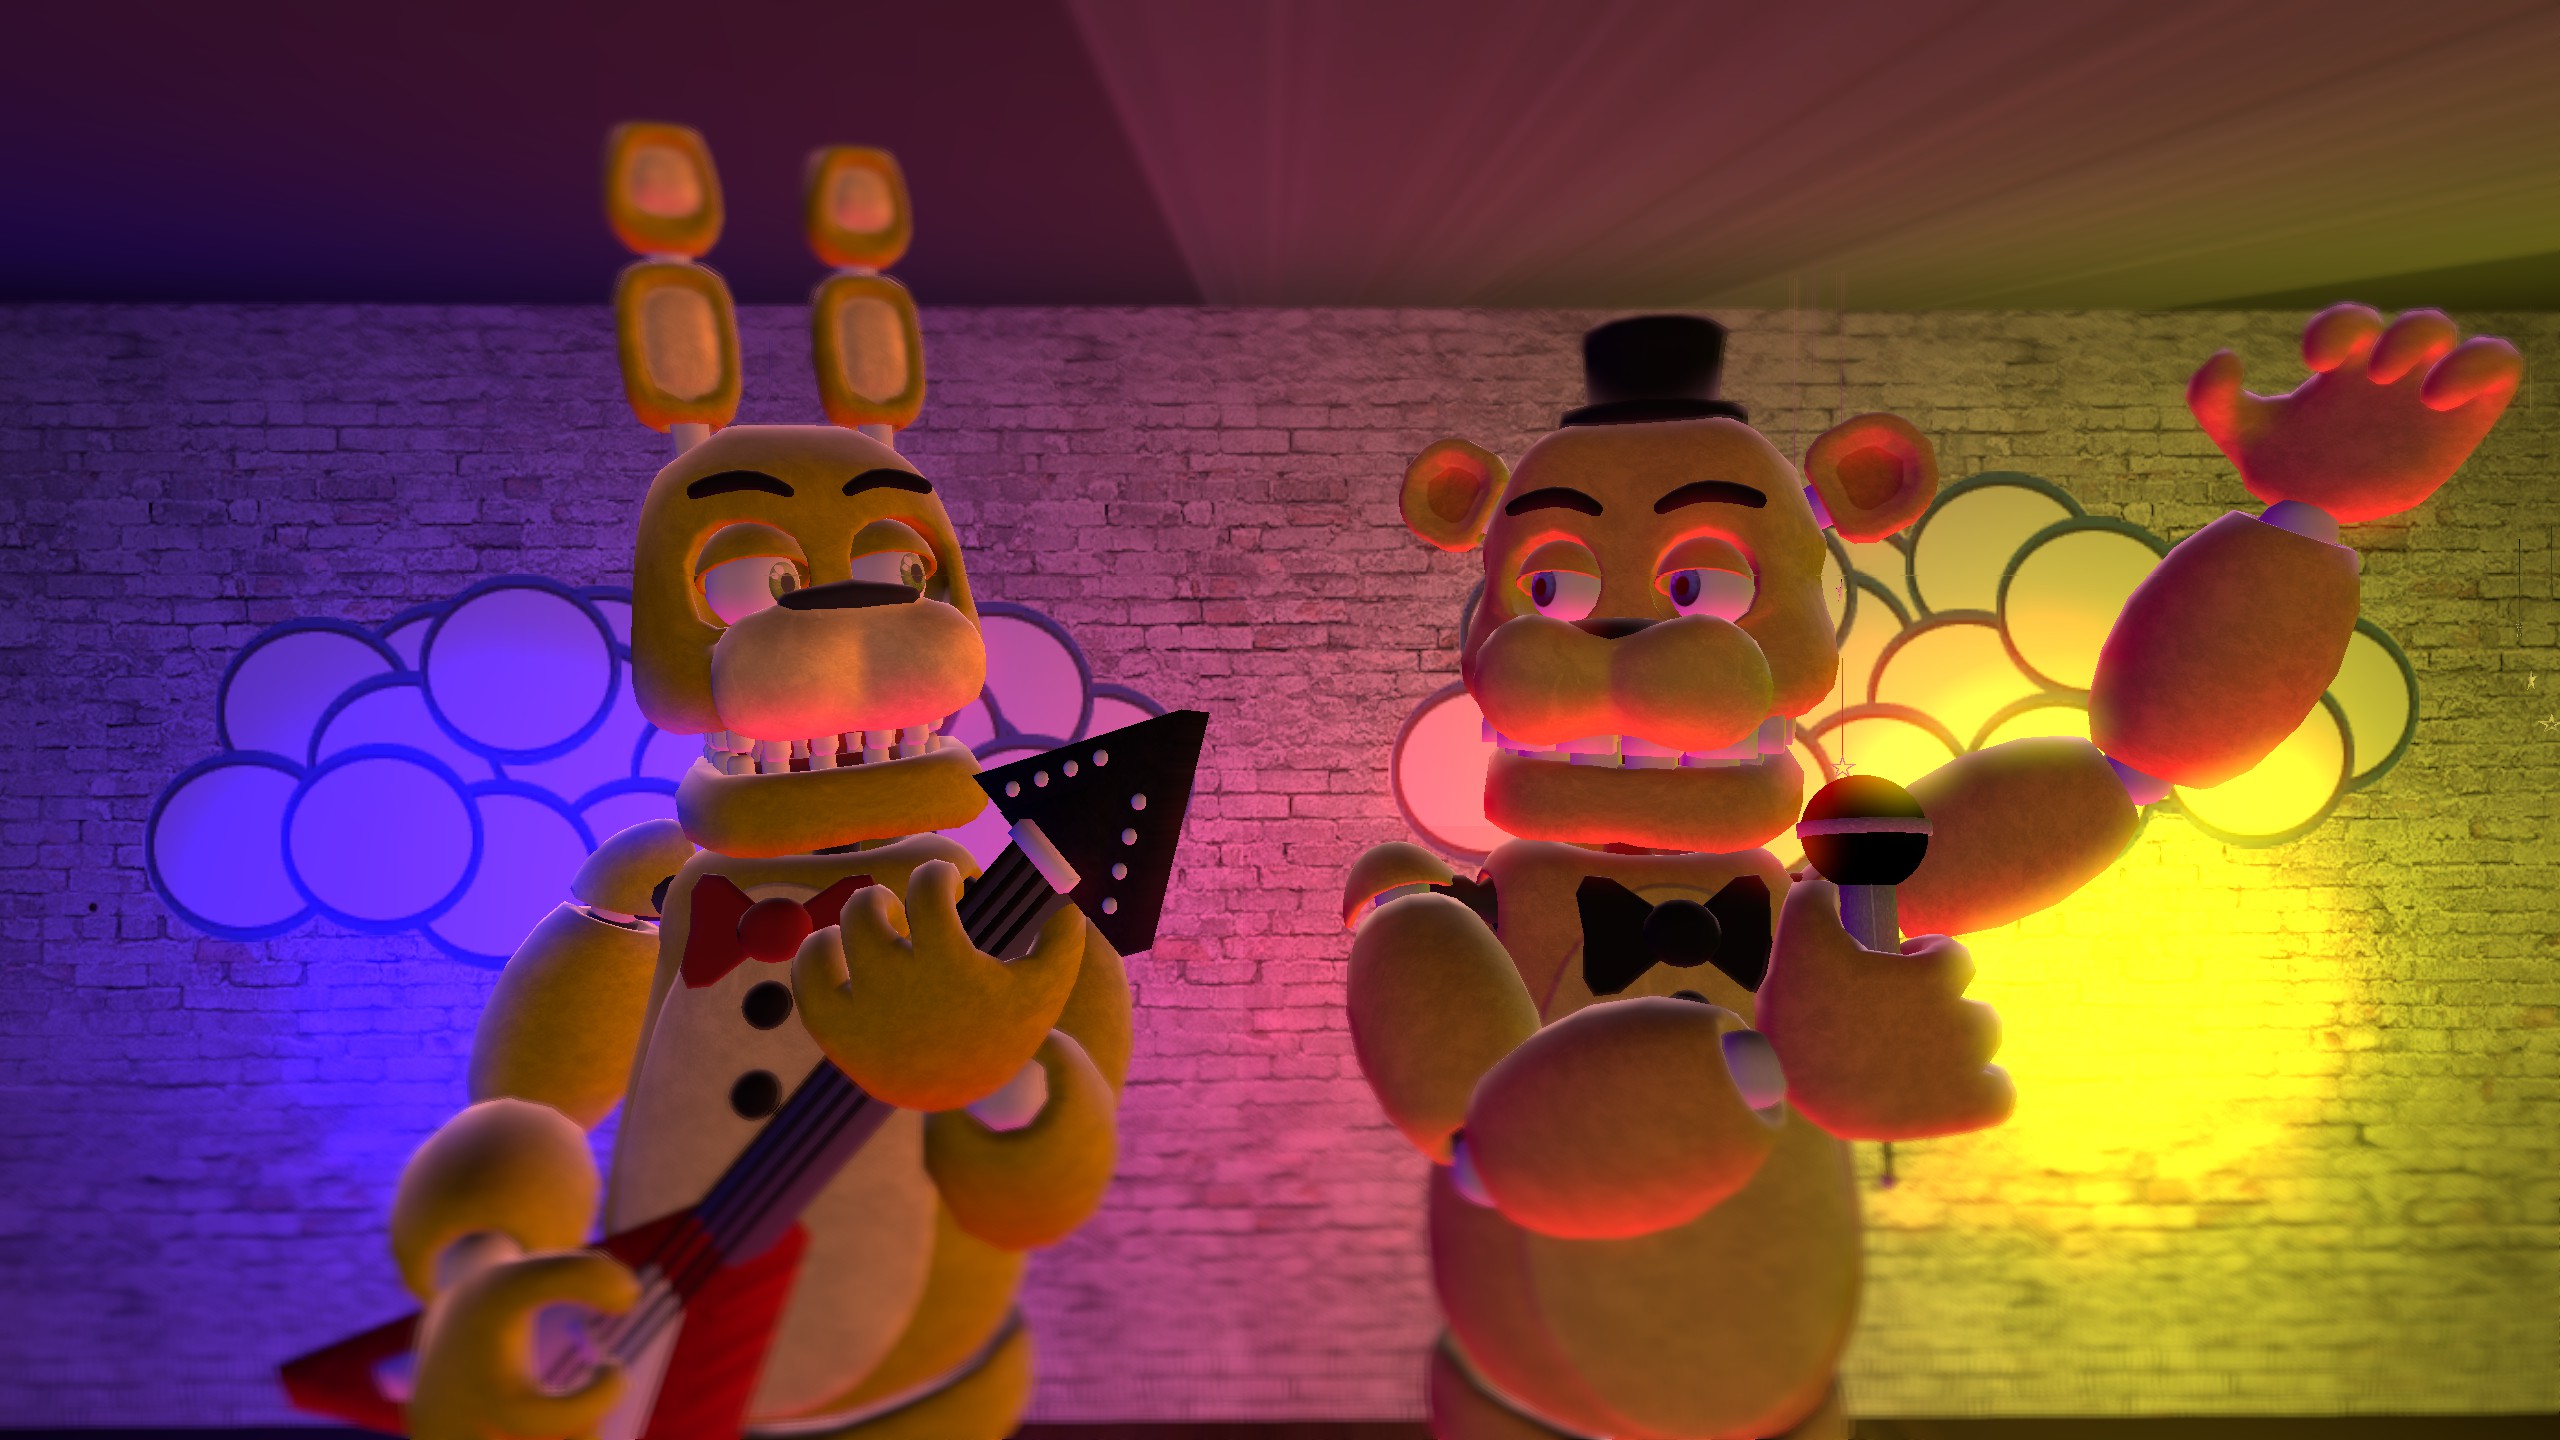 Gmod FNAF 4 The beginning of the nightmare by Therubyminecart on